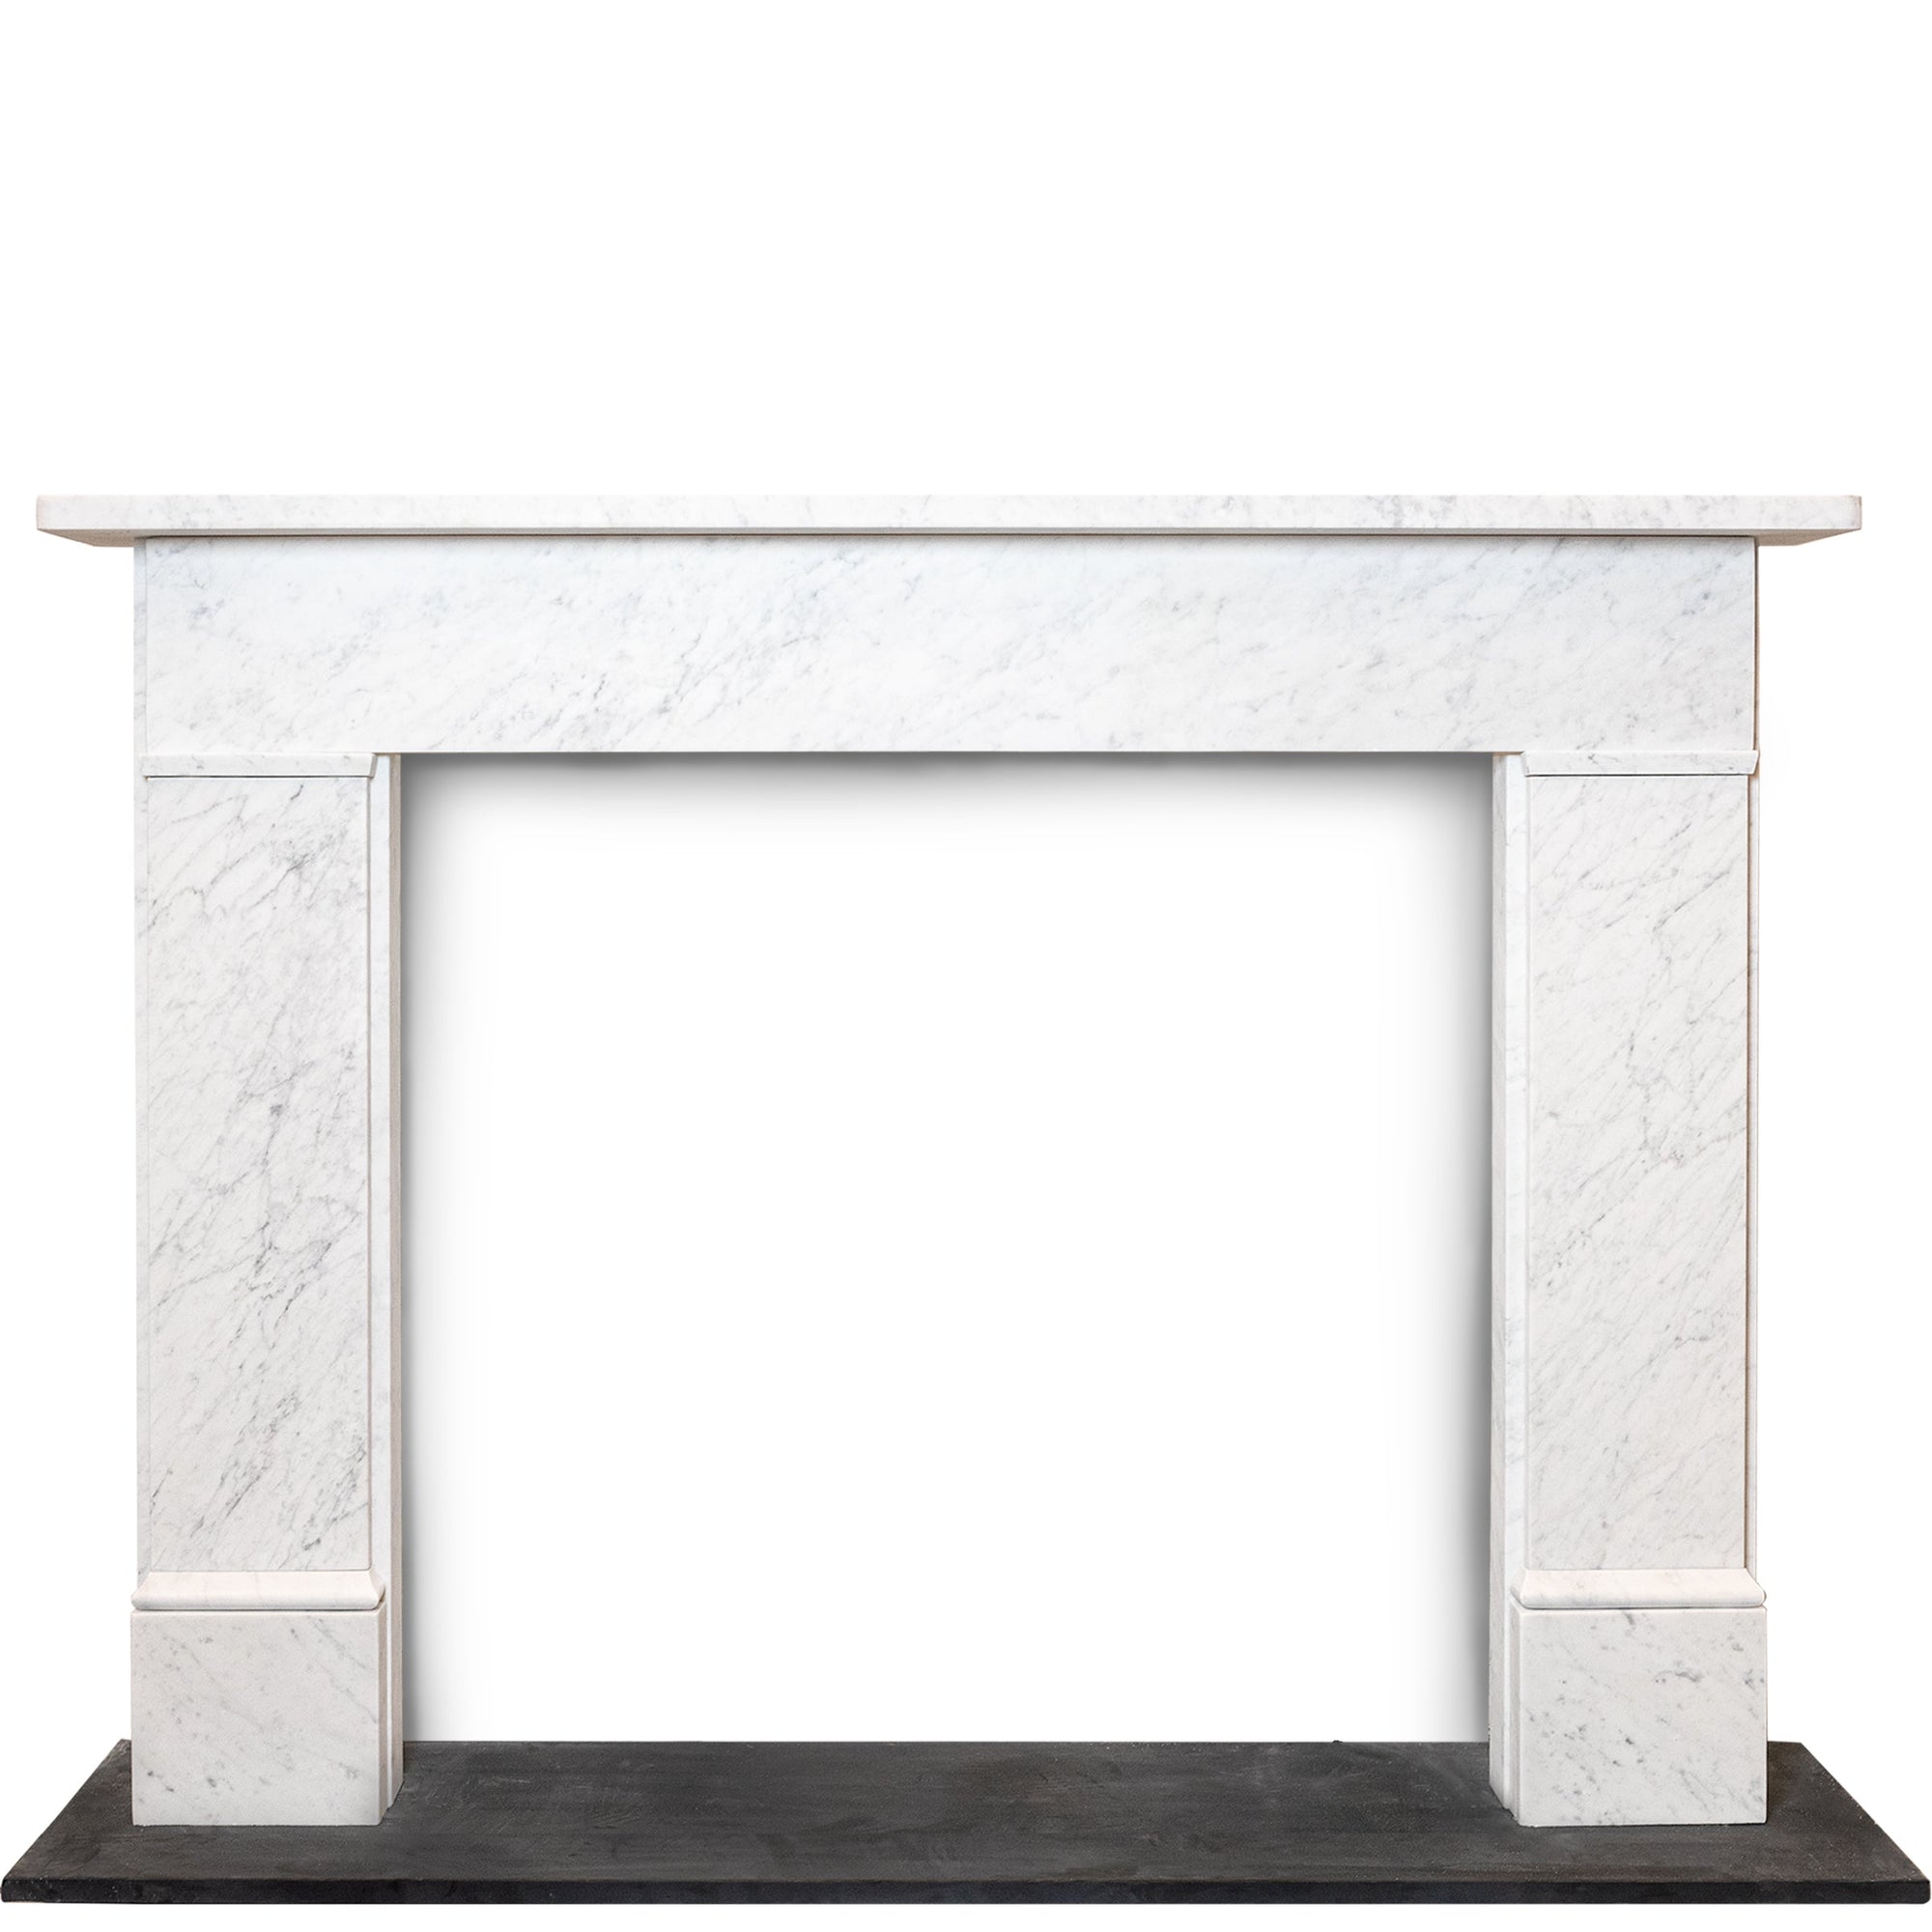 Early Victorian, Late Georgian Style Carrara Marble Fire Surround | The Architectural Forum